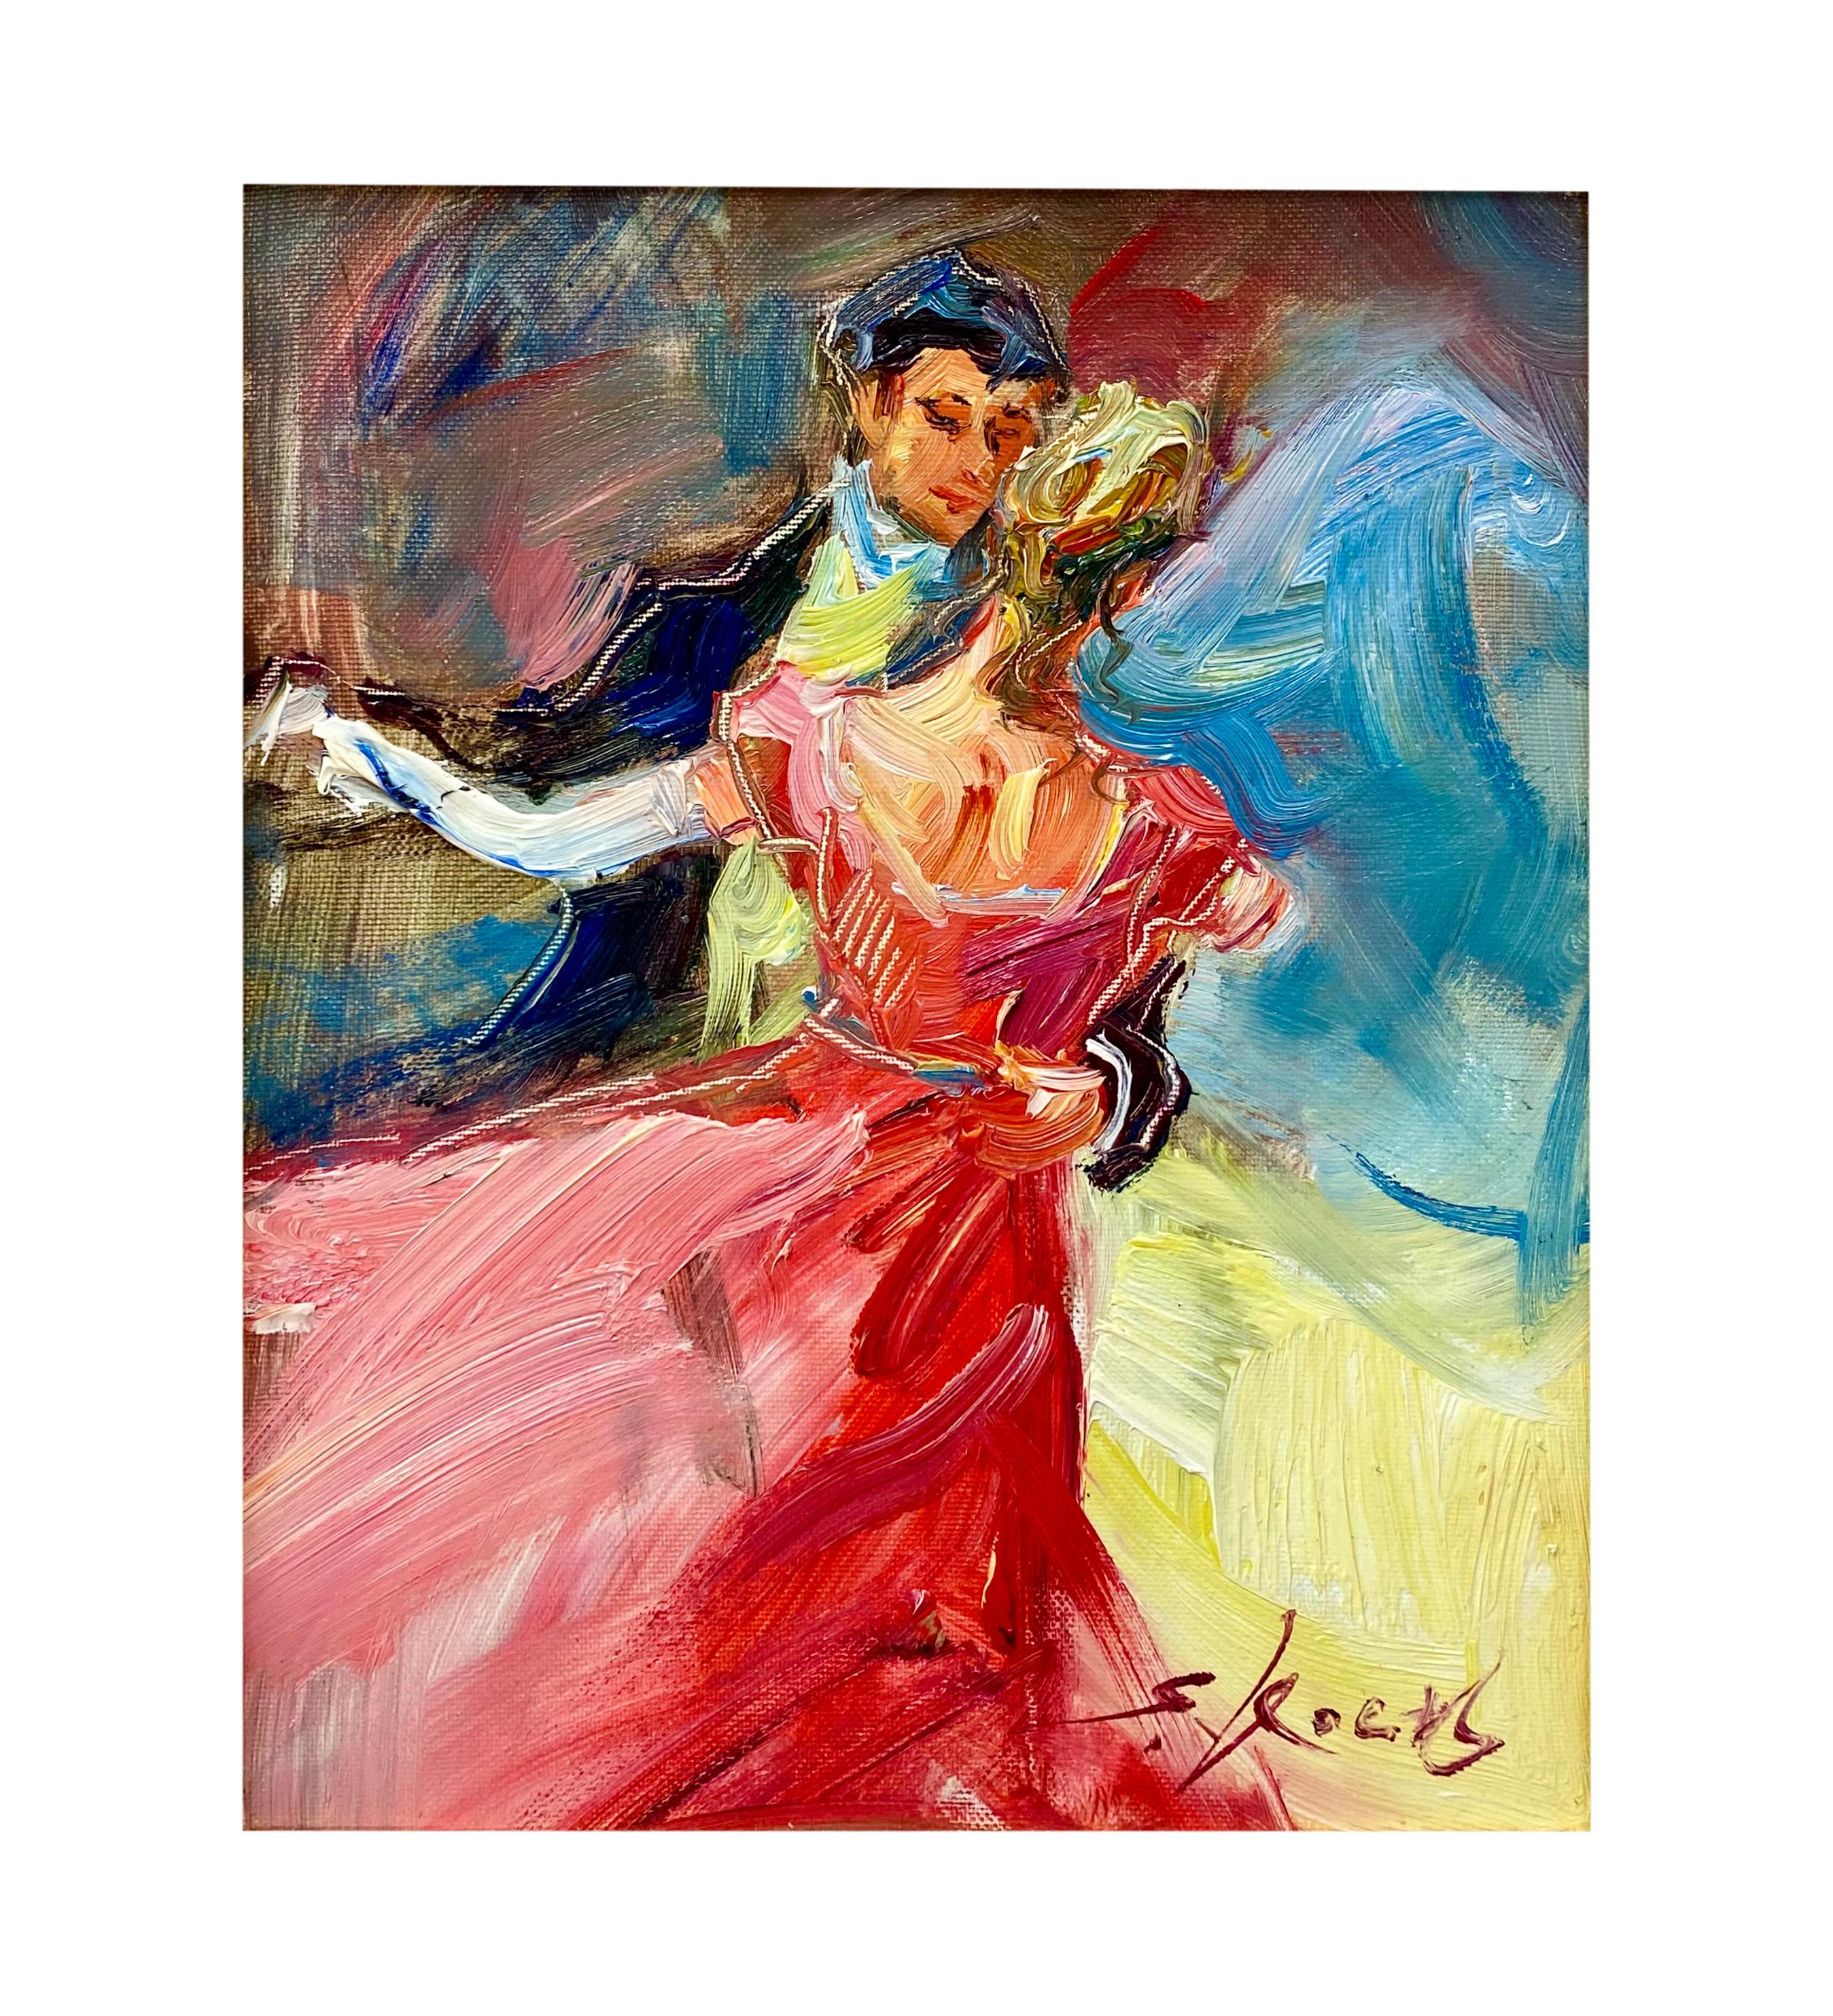 An exquisite oil on canvas painting depicting a man & woman waltz dancing. The woman wearing a pink dress, the man a black suit.  The painting is presented in fine hand-carved gilt frame and it is signed lower right by the artist 